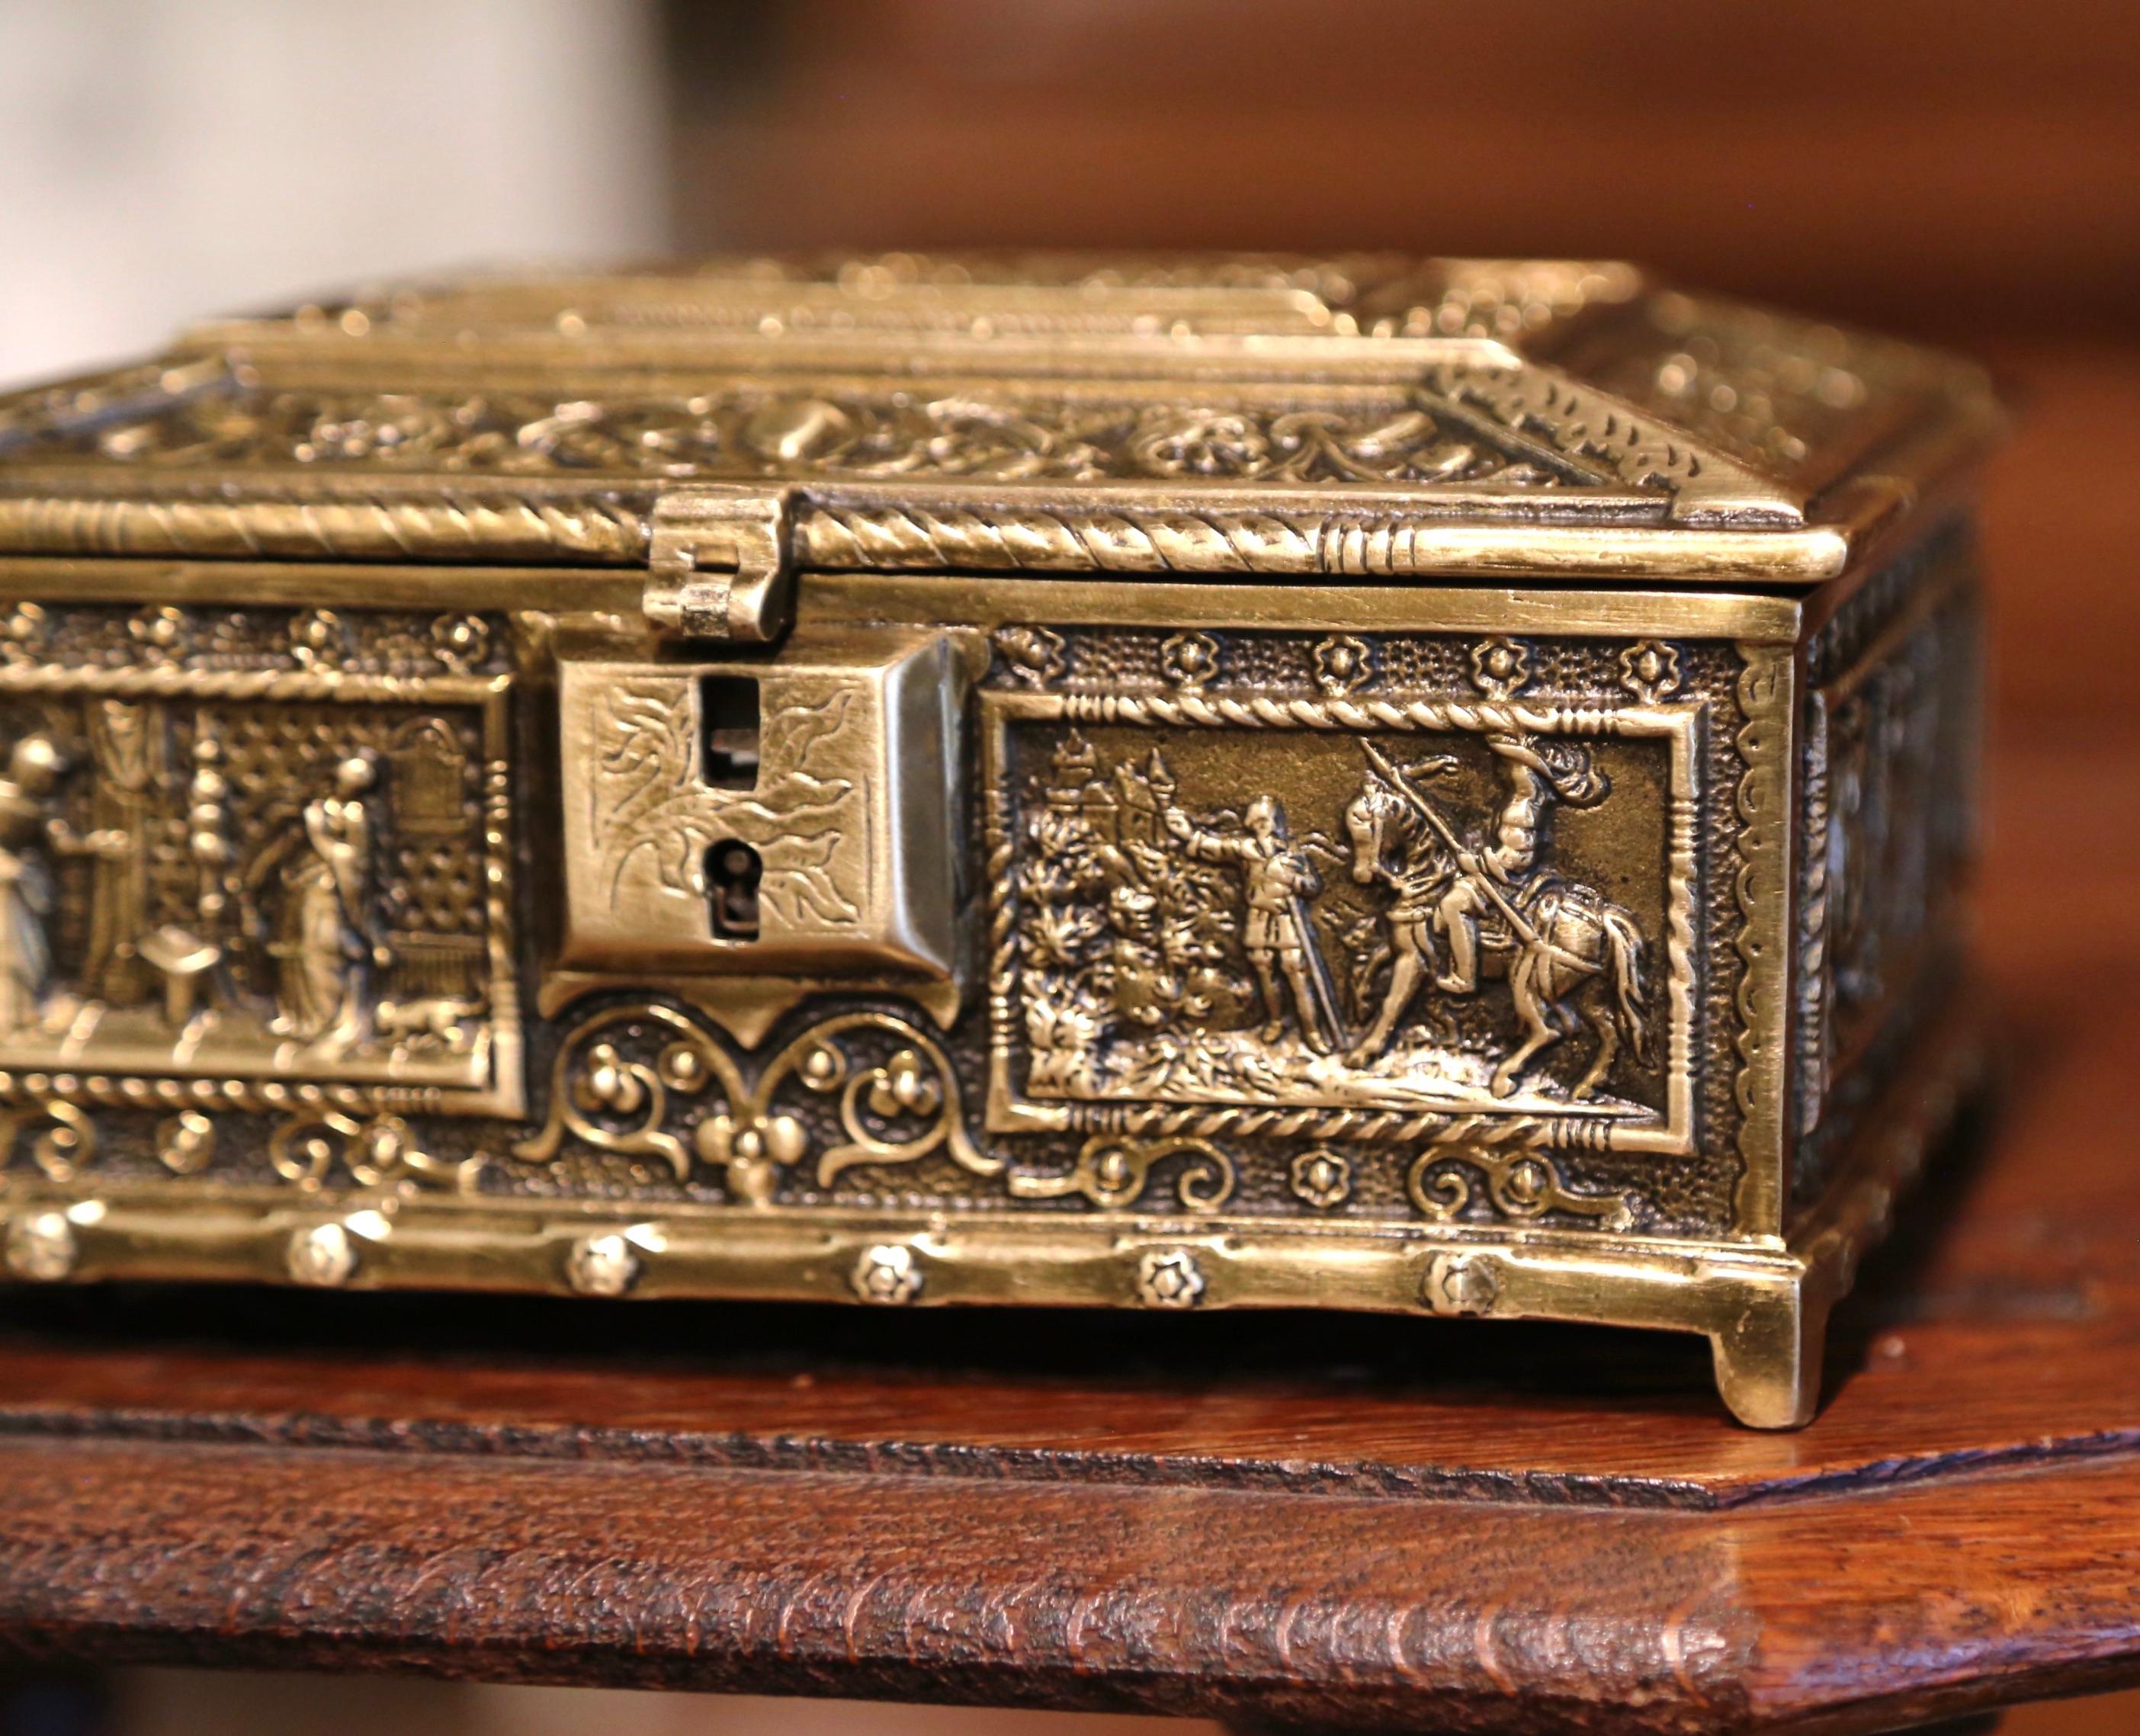 This antique Renaissance casket was created in Belgium, circa 1880. Rectangular in shape, the gilt bronze box is embellished with French court motifs, including a courting scene on the top. The sides depicts scenes like a duke riding his horse, a